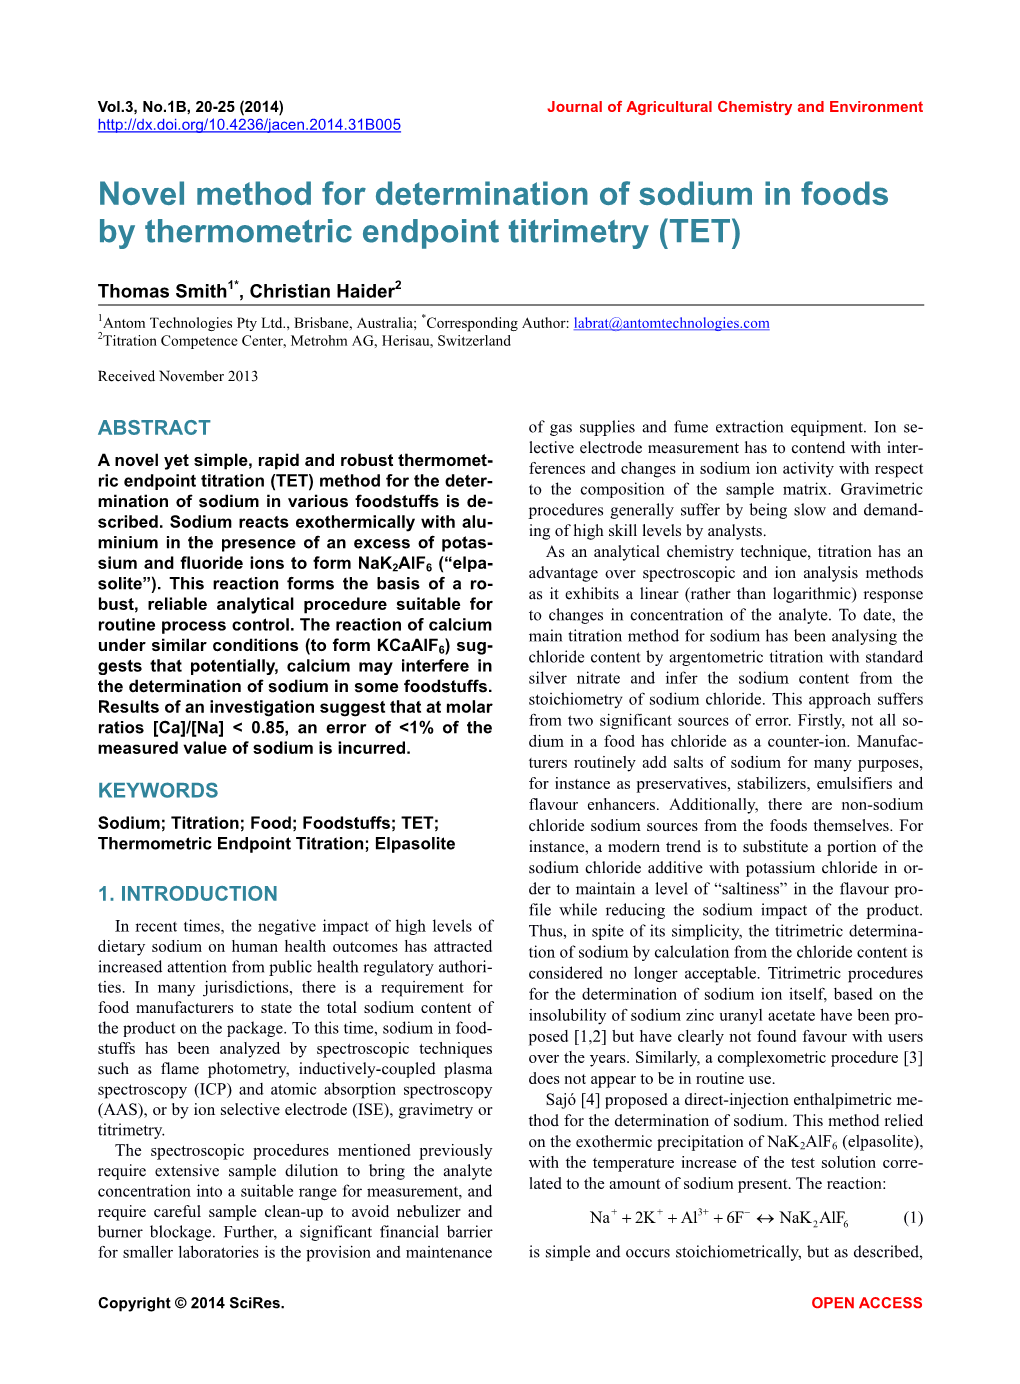 Novel Method for Determination of Sodium in Foods by Thermometric Endpoint Titrimetry (TET)